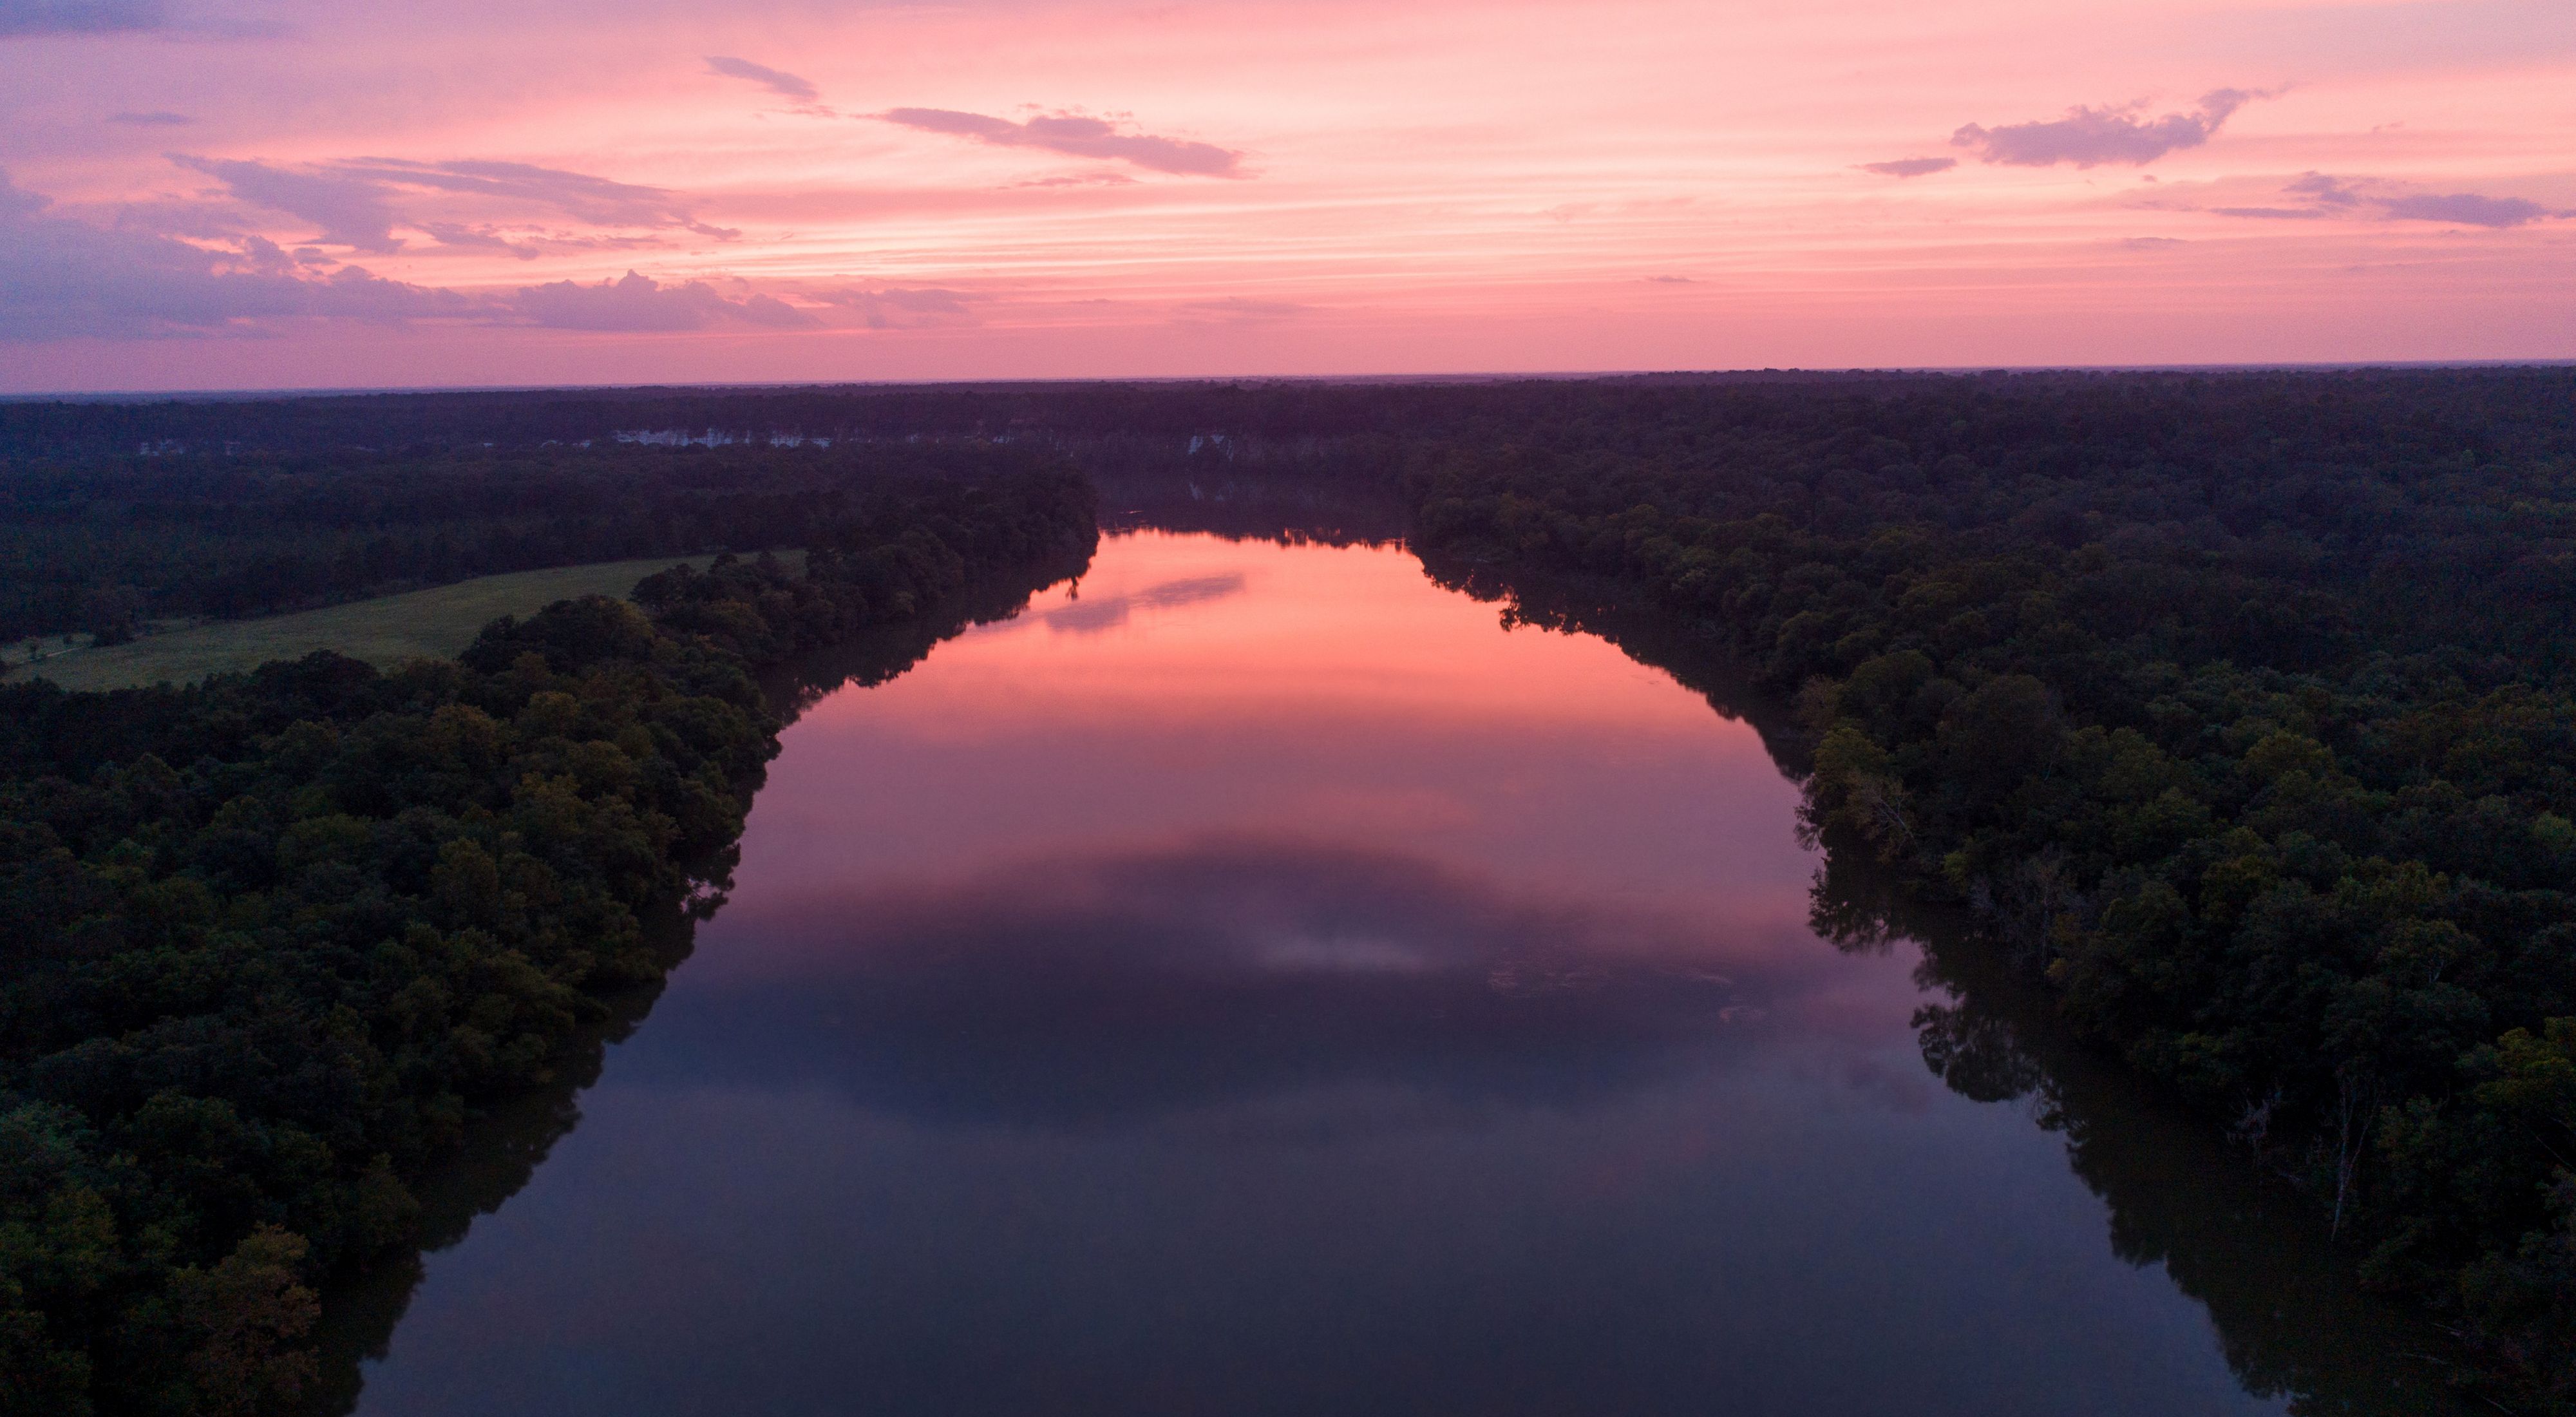 Sun sets over the Alabama River with pink and purple hues bouncing off the wide river in the center flanked by tall trees.